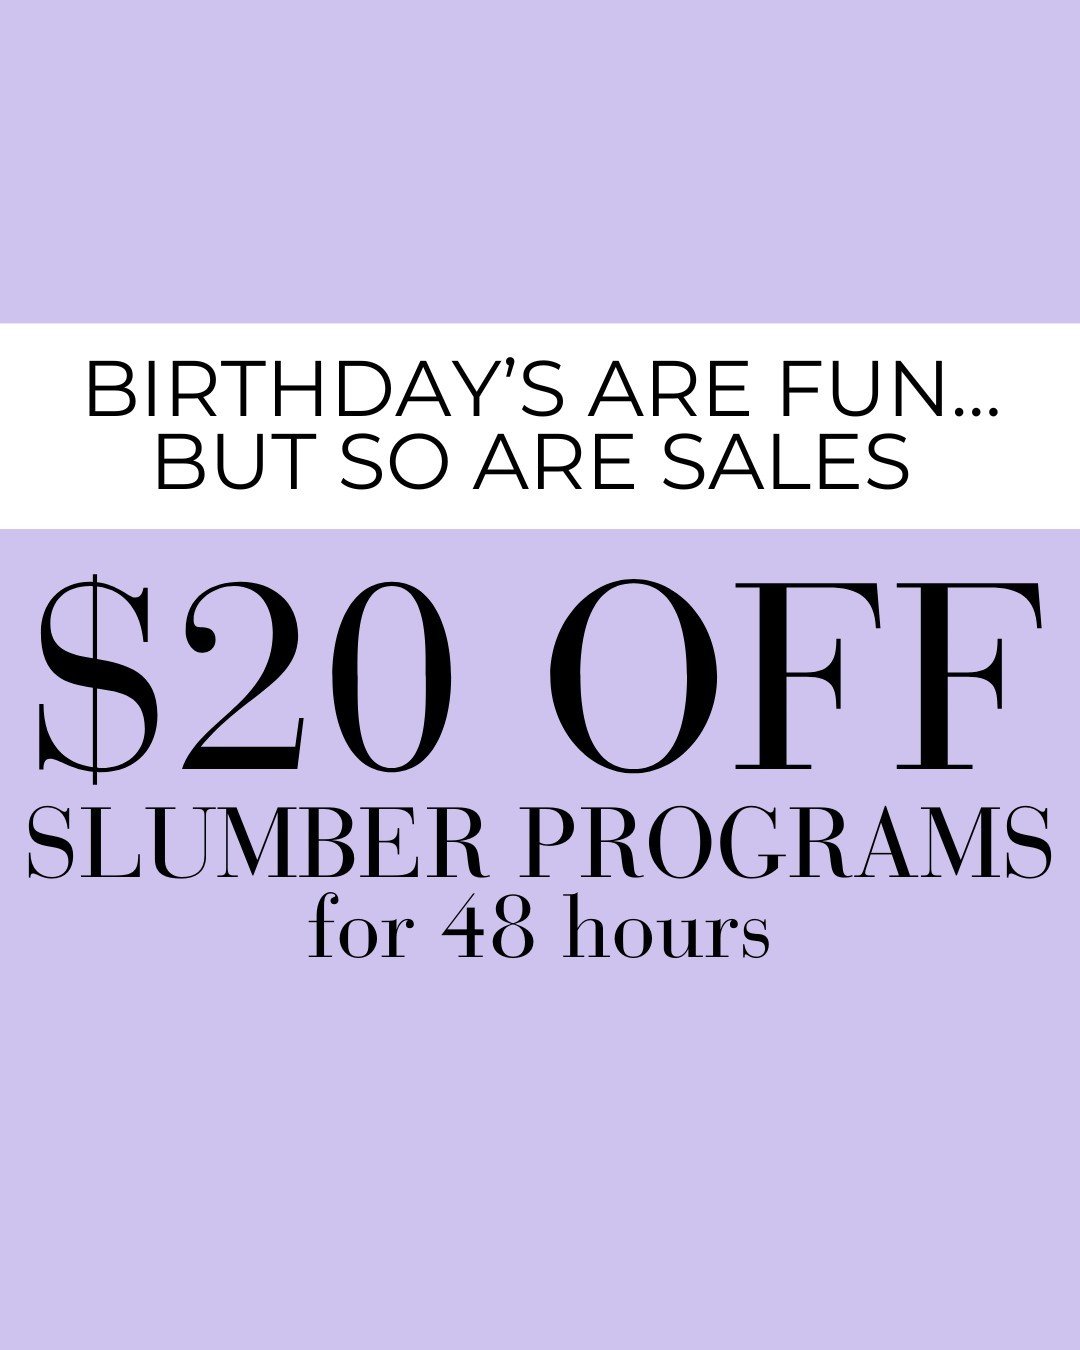 🌟 Are you tired of being tired and hanging out for restful nights?
 
Say goodbye to sleepless nights and hello to restful slumber with my birthday sale! 🌙
 
FOR THE NEXT 48 HOURS TAKE $20 OFF SLUMBER PROGRAMS
 
With access to our Slumber Program, y